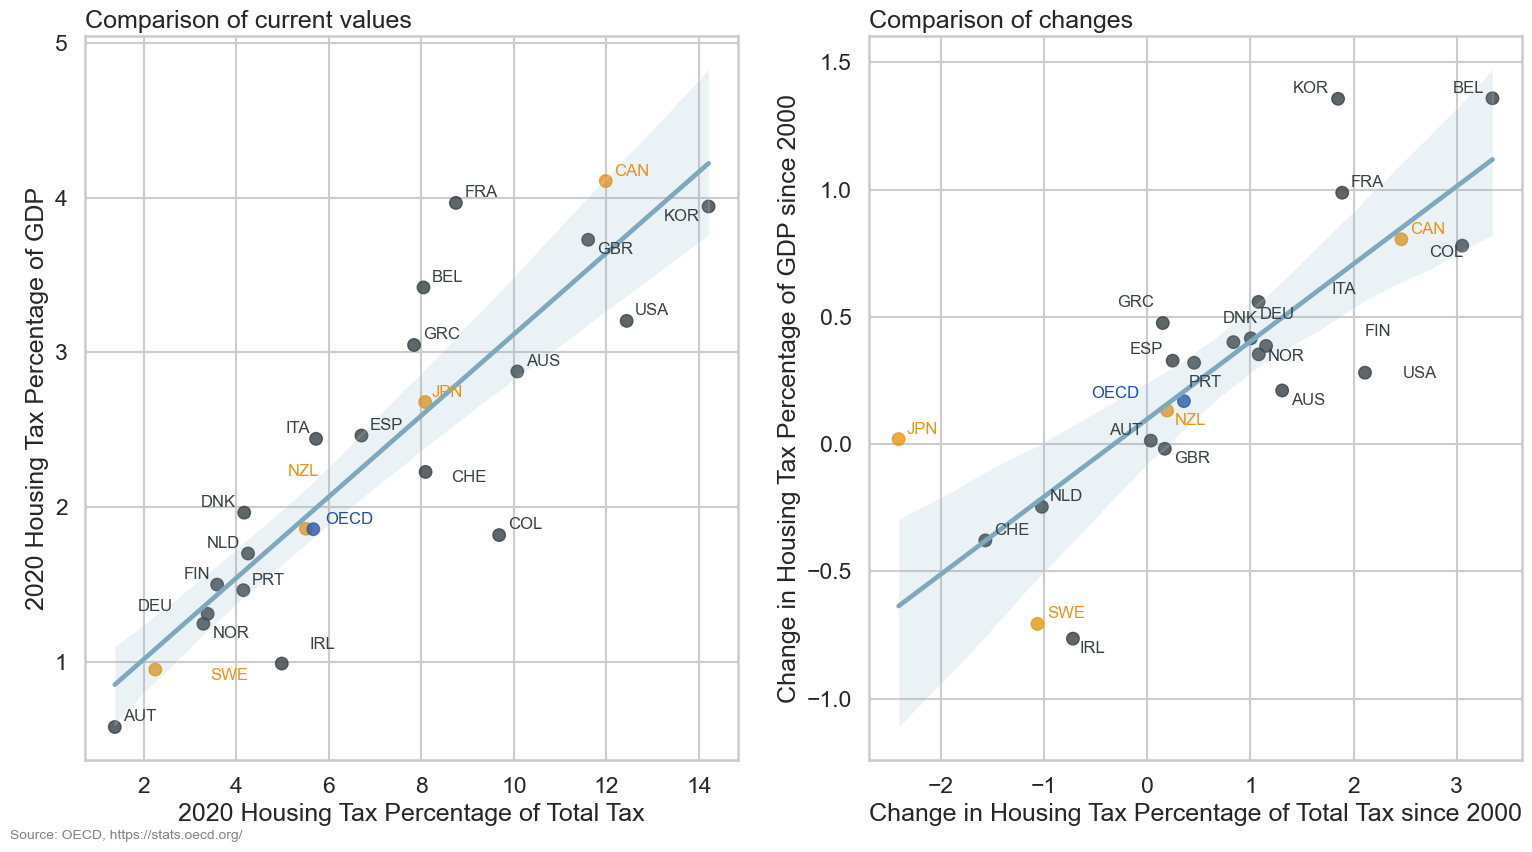 Scatter plot showing the relationship between housing tax as a percentage of GDP and housing tax as a percentage of total tax in 2020 and the changes since 2000 for selected OECD countries